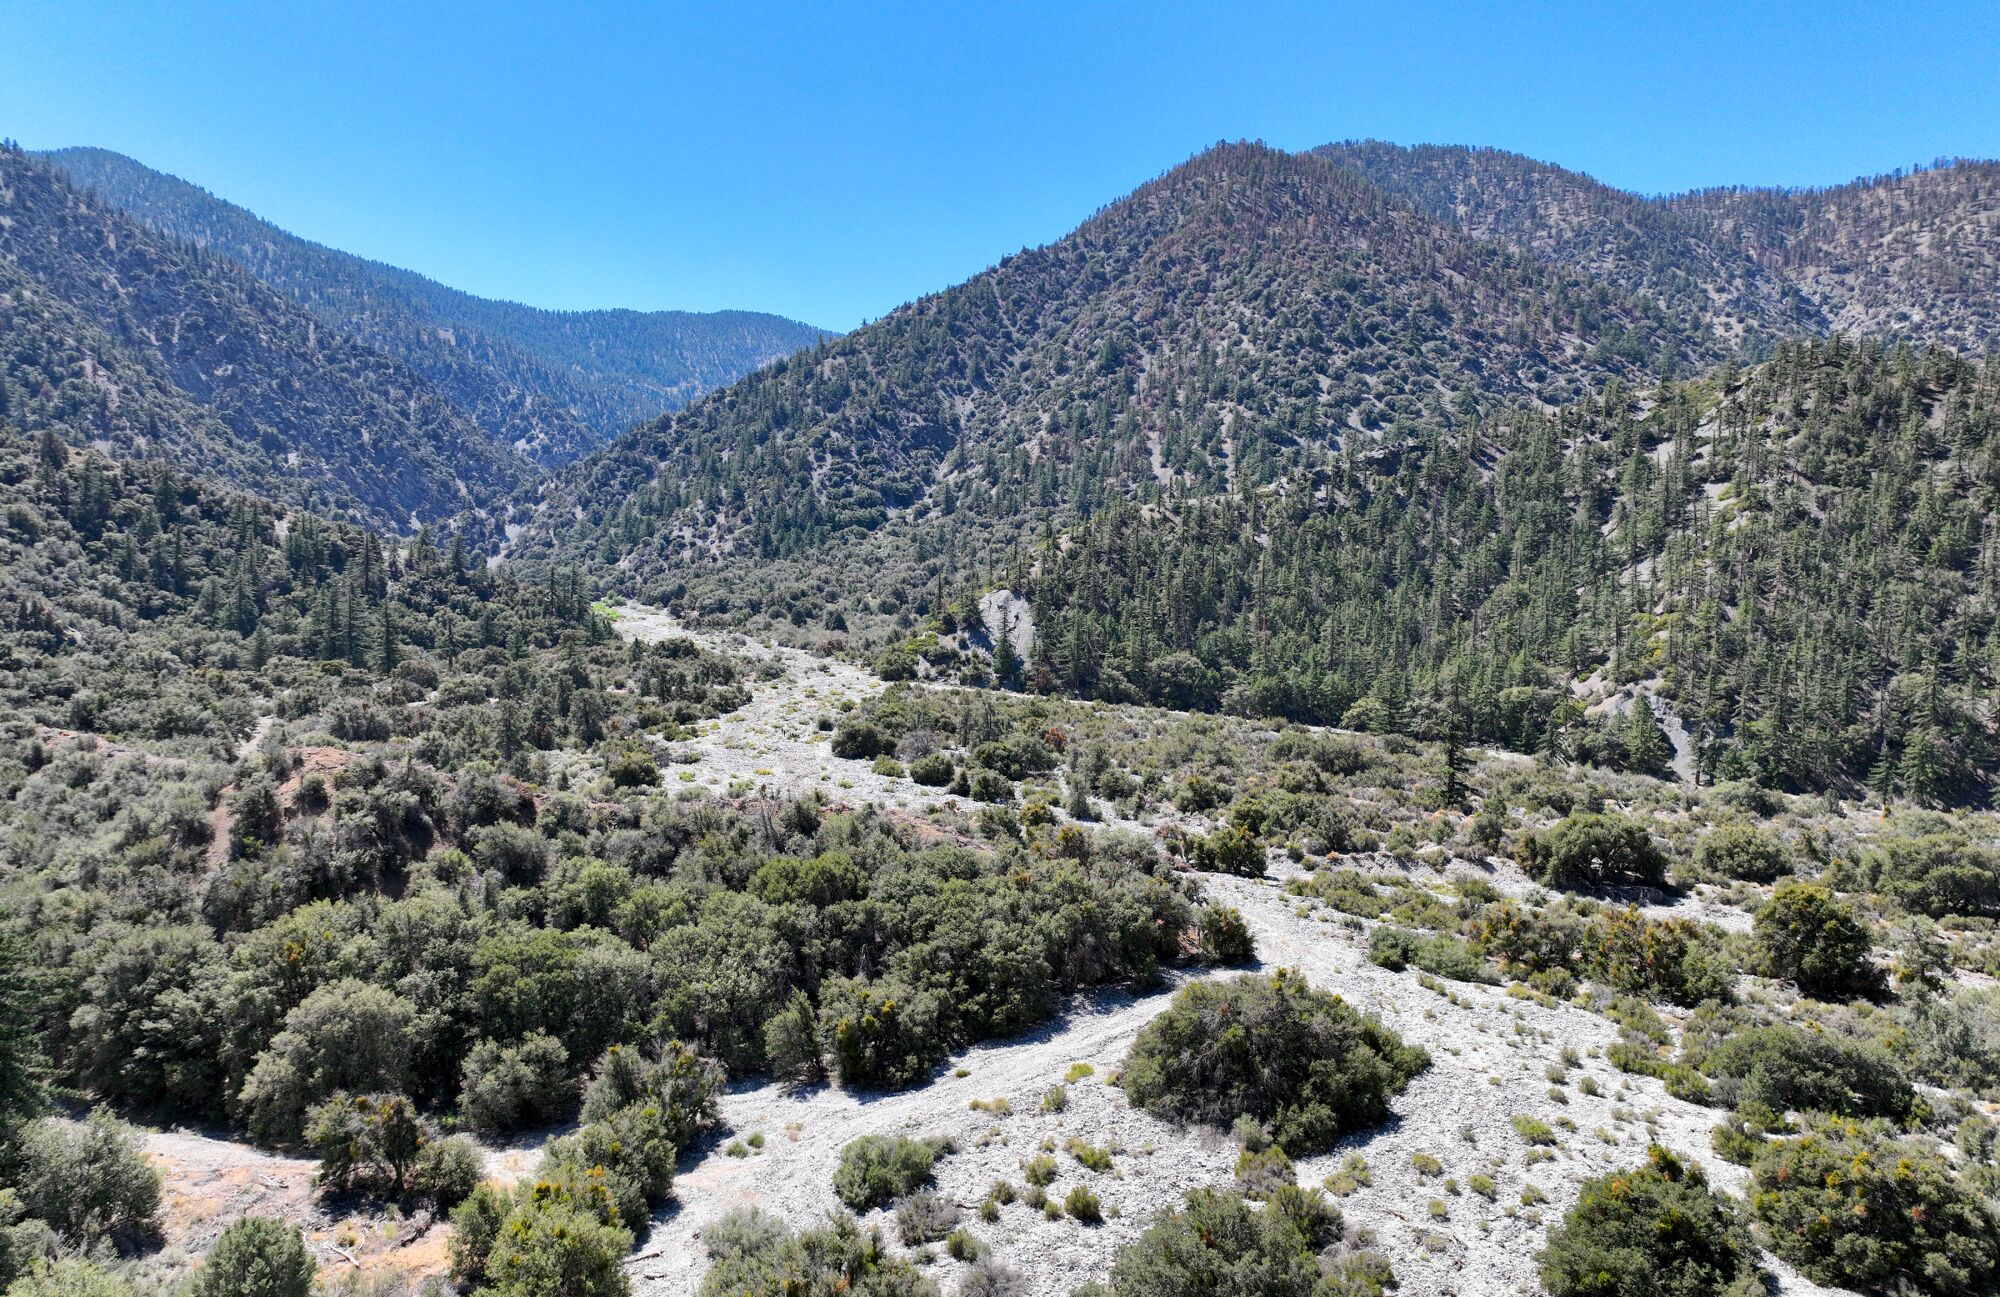 The San Gabriel Mountains in the Angeles National Forest